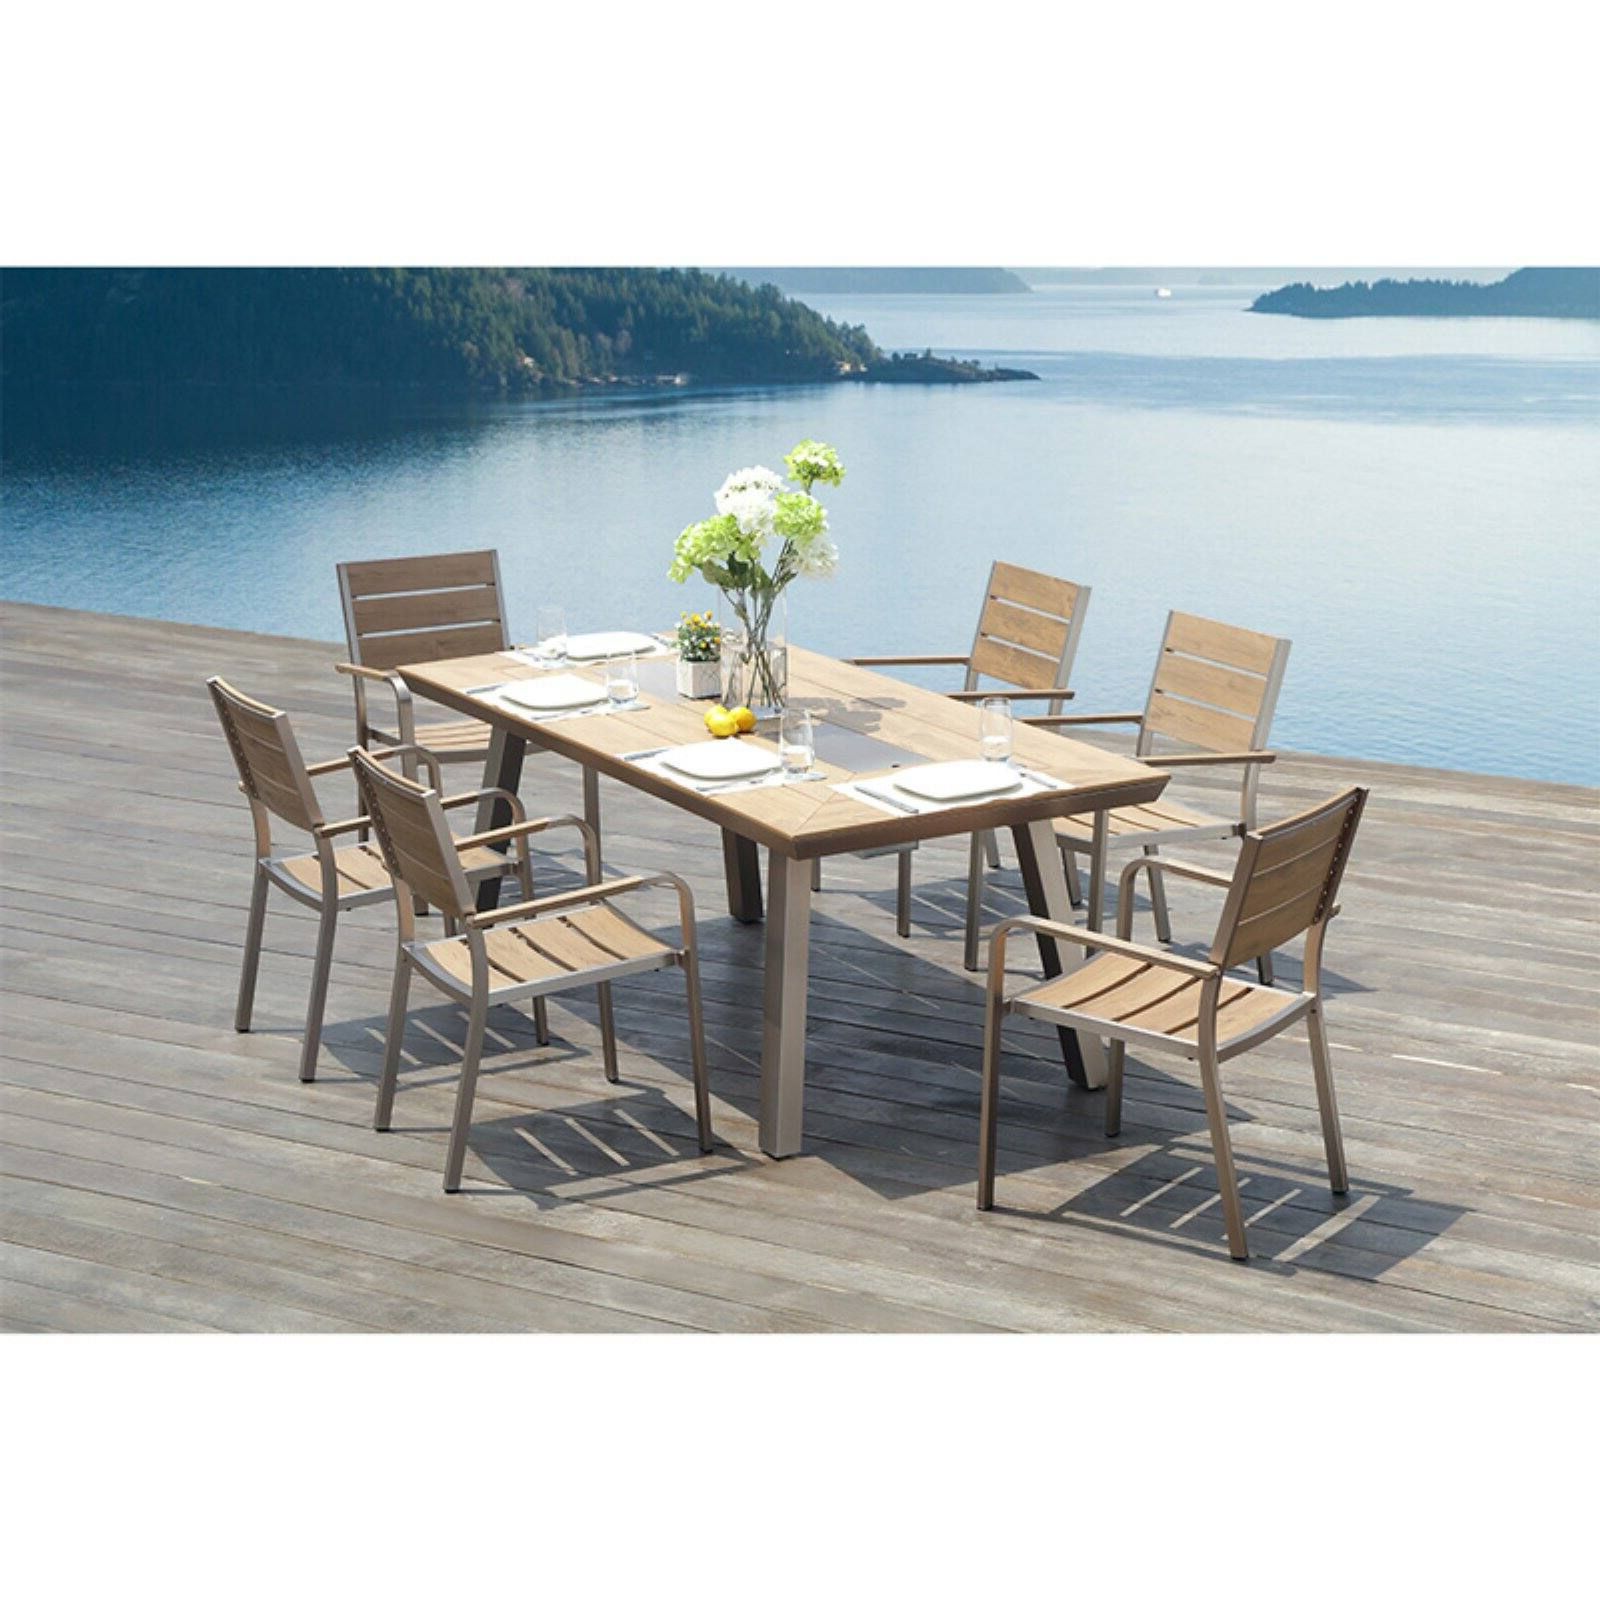 Preferred Ove Decors Pompano 7 Piece Wood Patio Dining Set – Walmart In 7 Piece Patio Dining Sets (View 9 of 15)